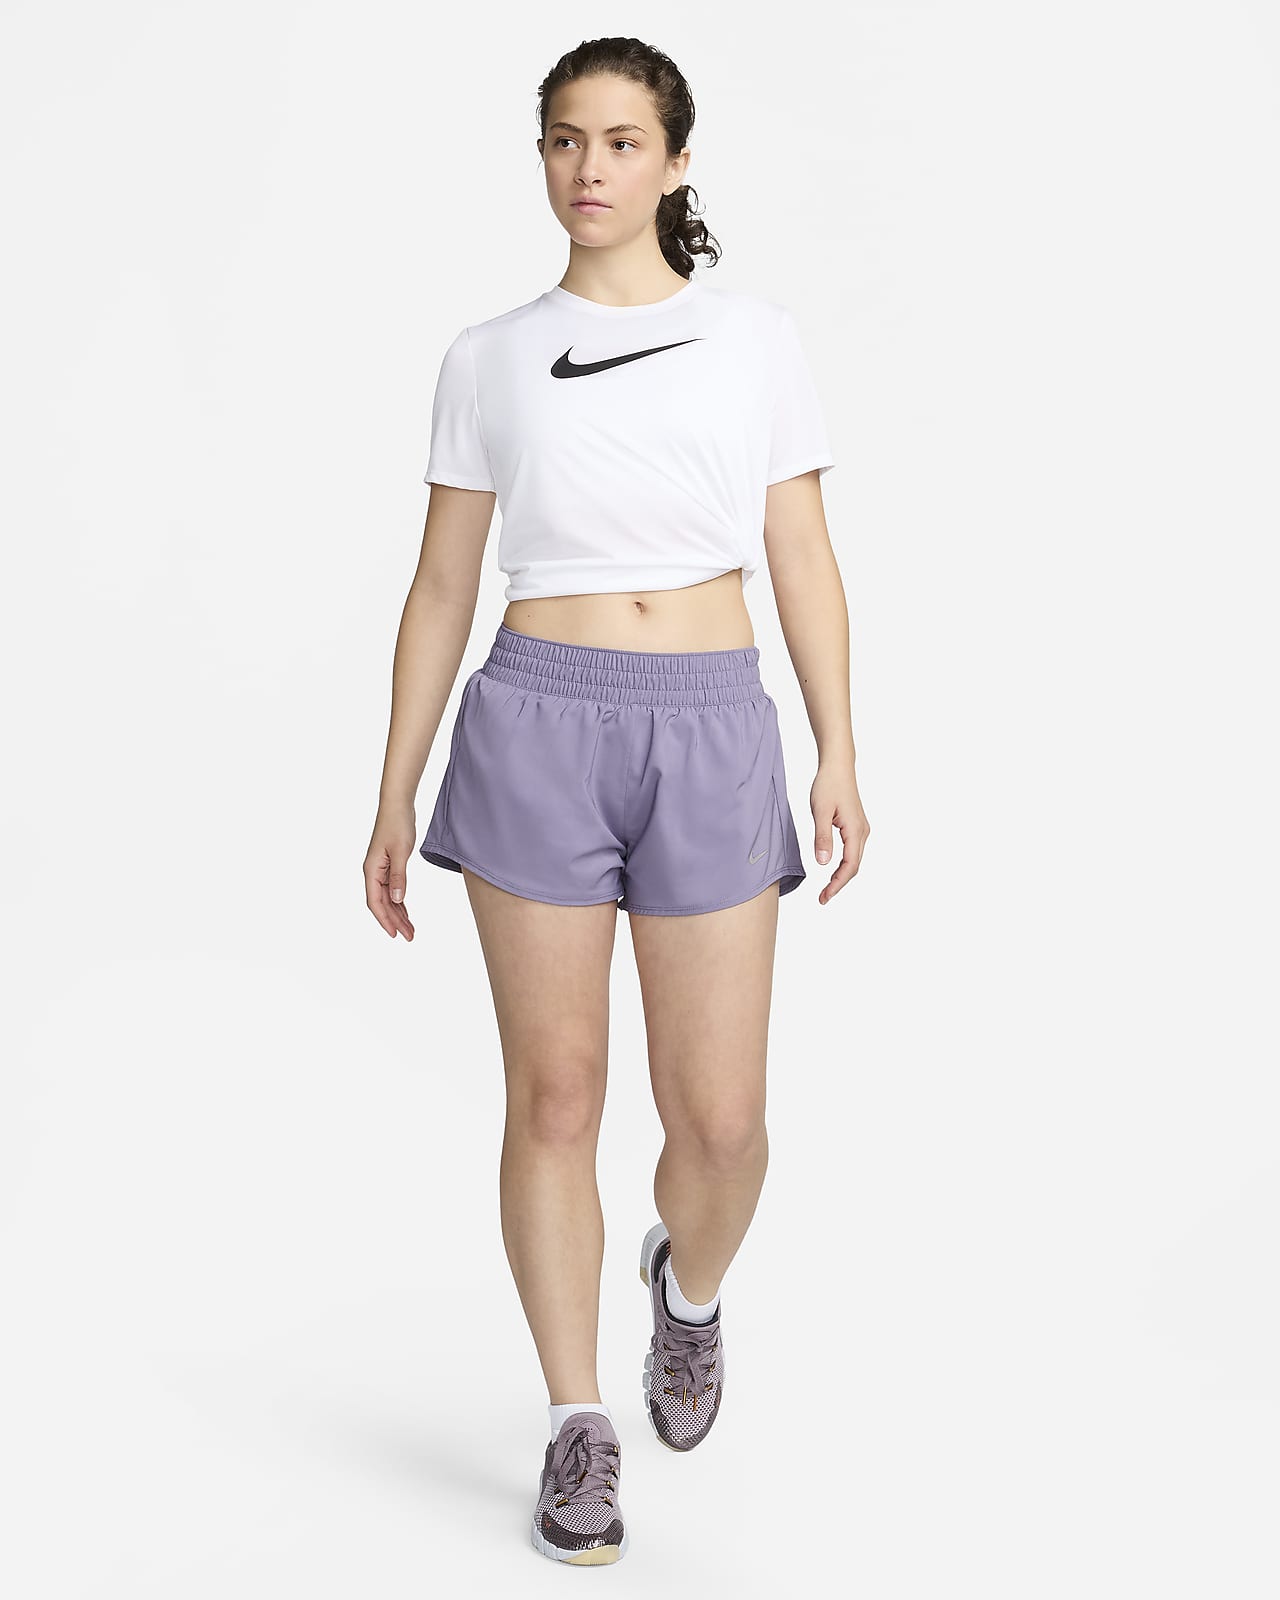 Topper Sports Malaysia - NIKE WMNS MID RISE 3 2-IN-1 SHORT